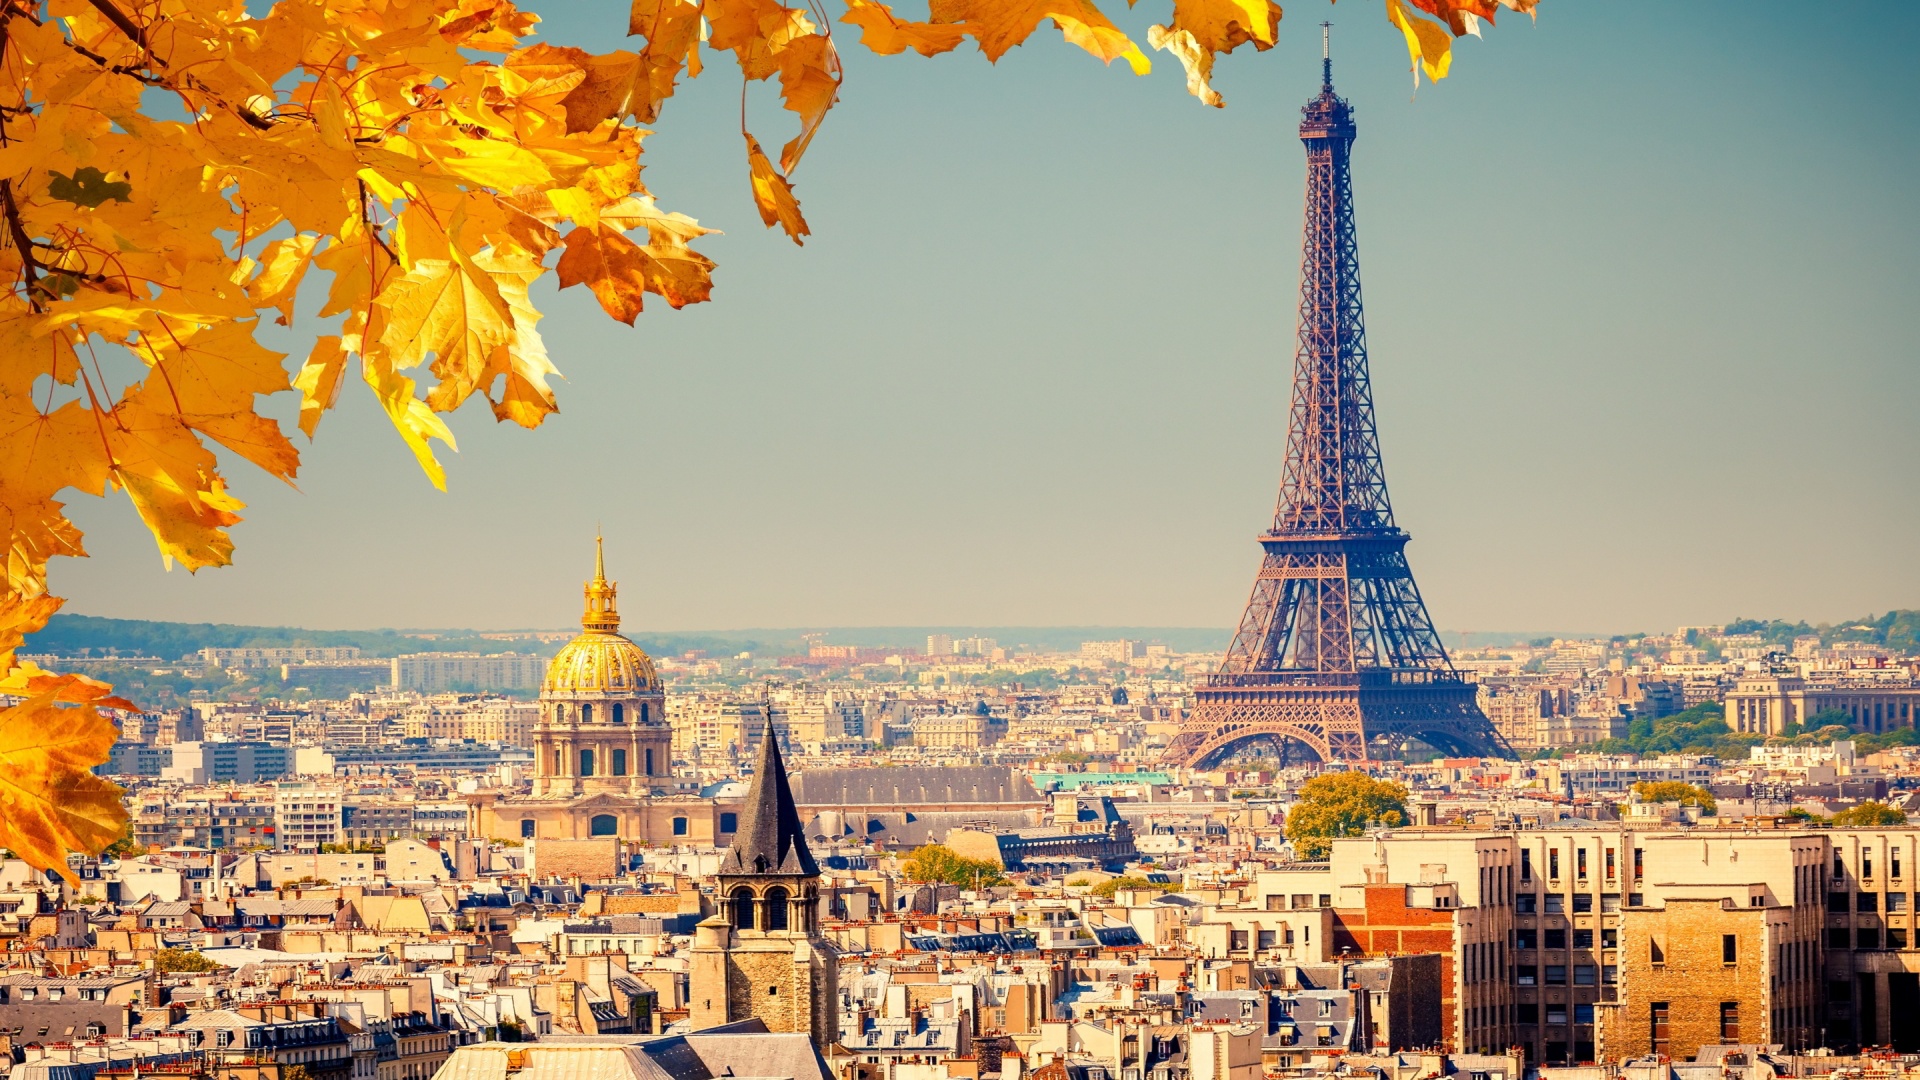  HD Paris Backgrounds The City Of Lights And Romance